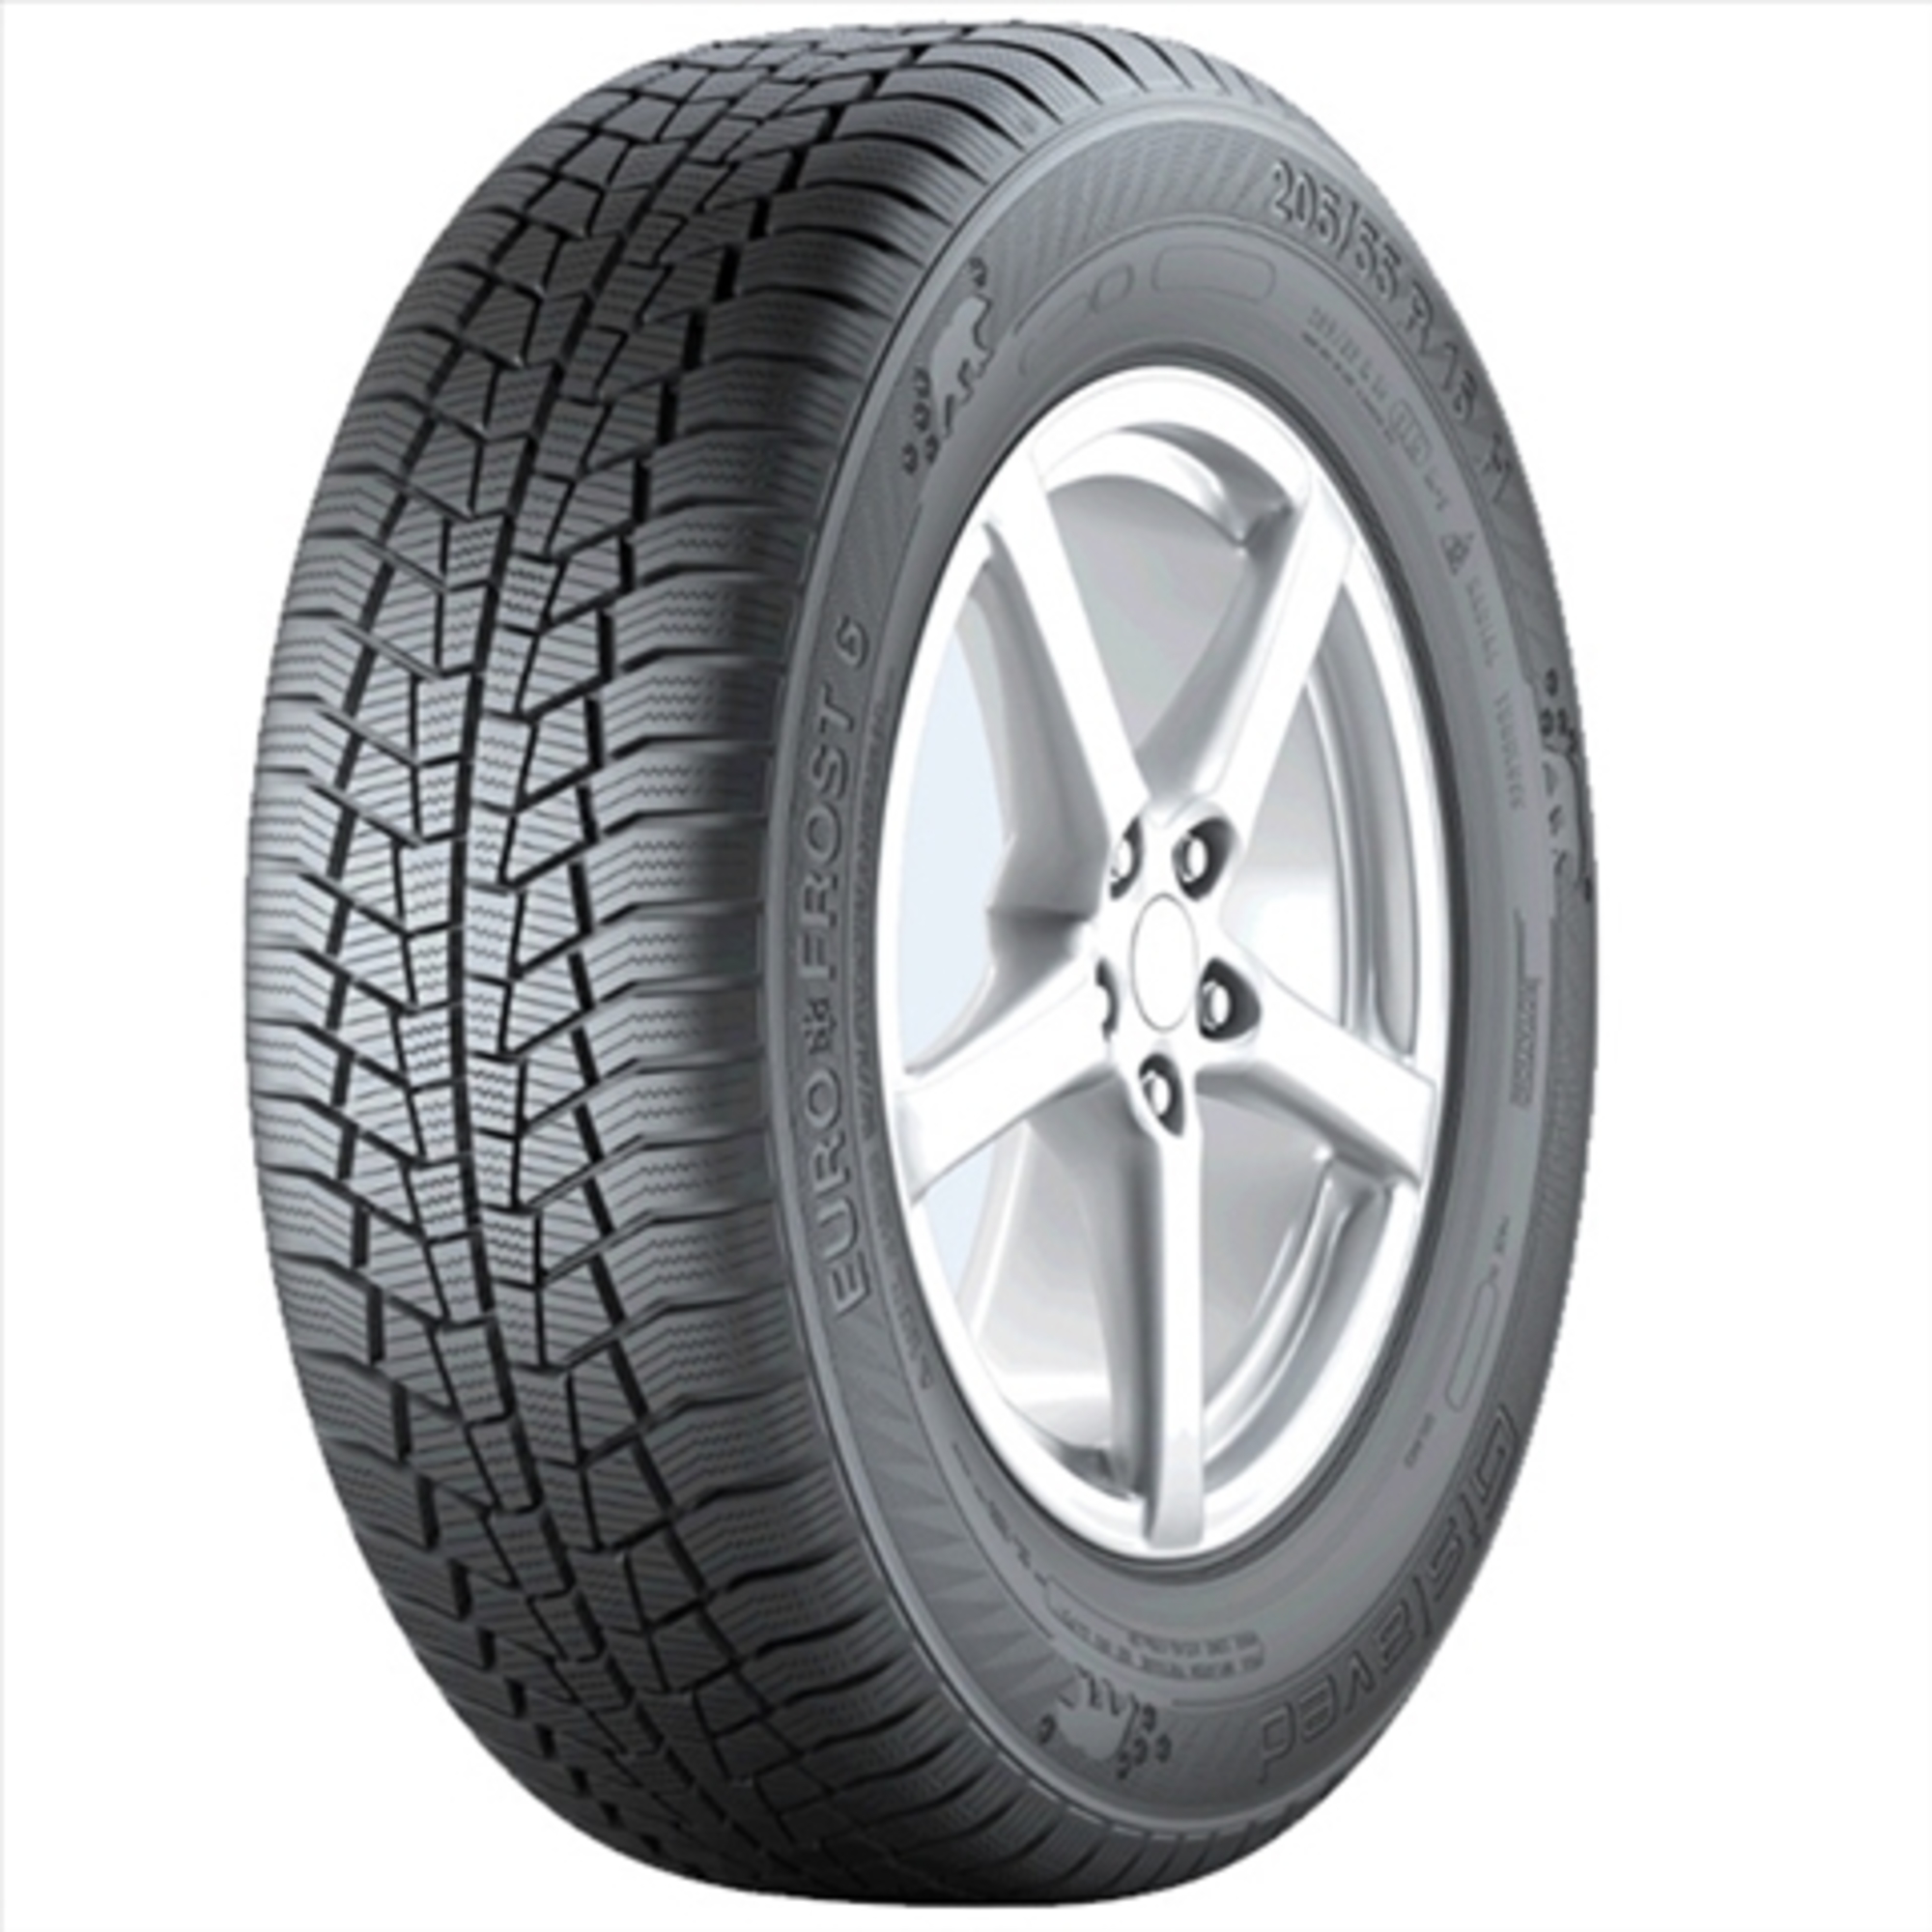 155/70r13 75t euro*frost 6 A03434860000CO GISLAVED